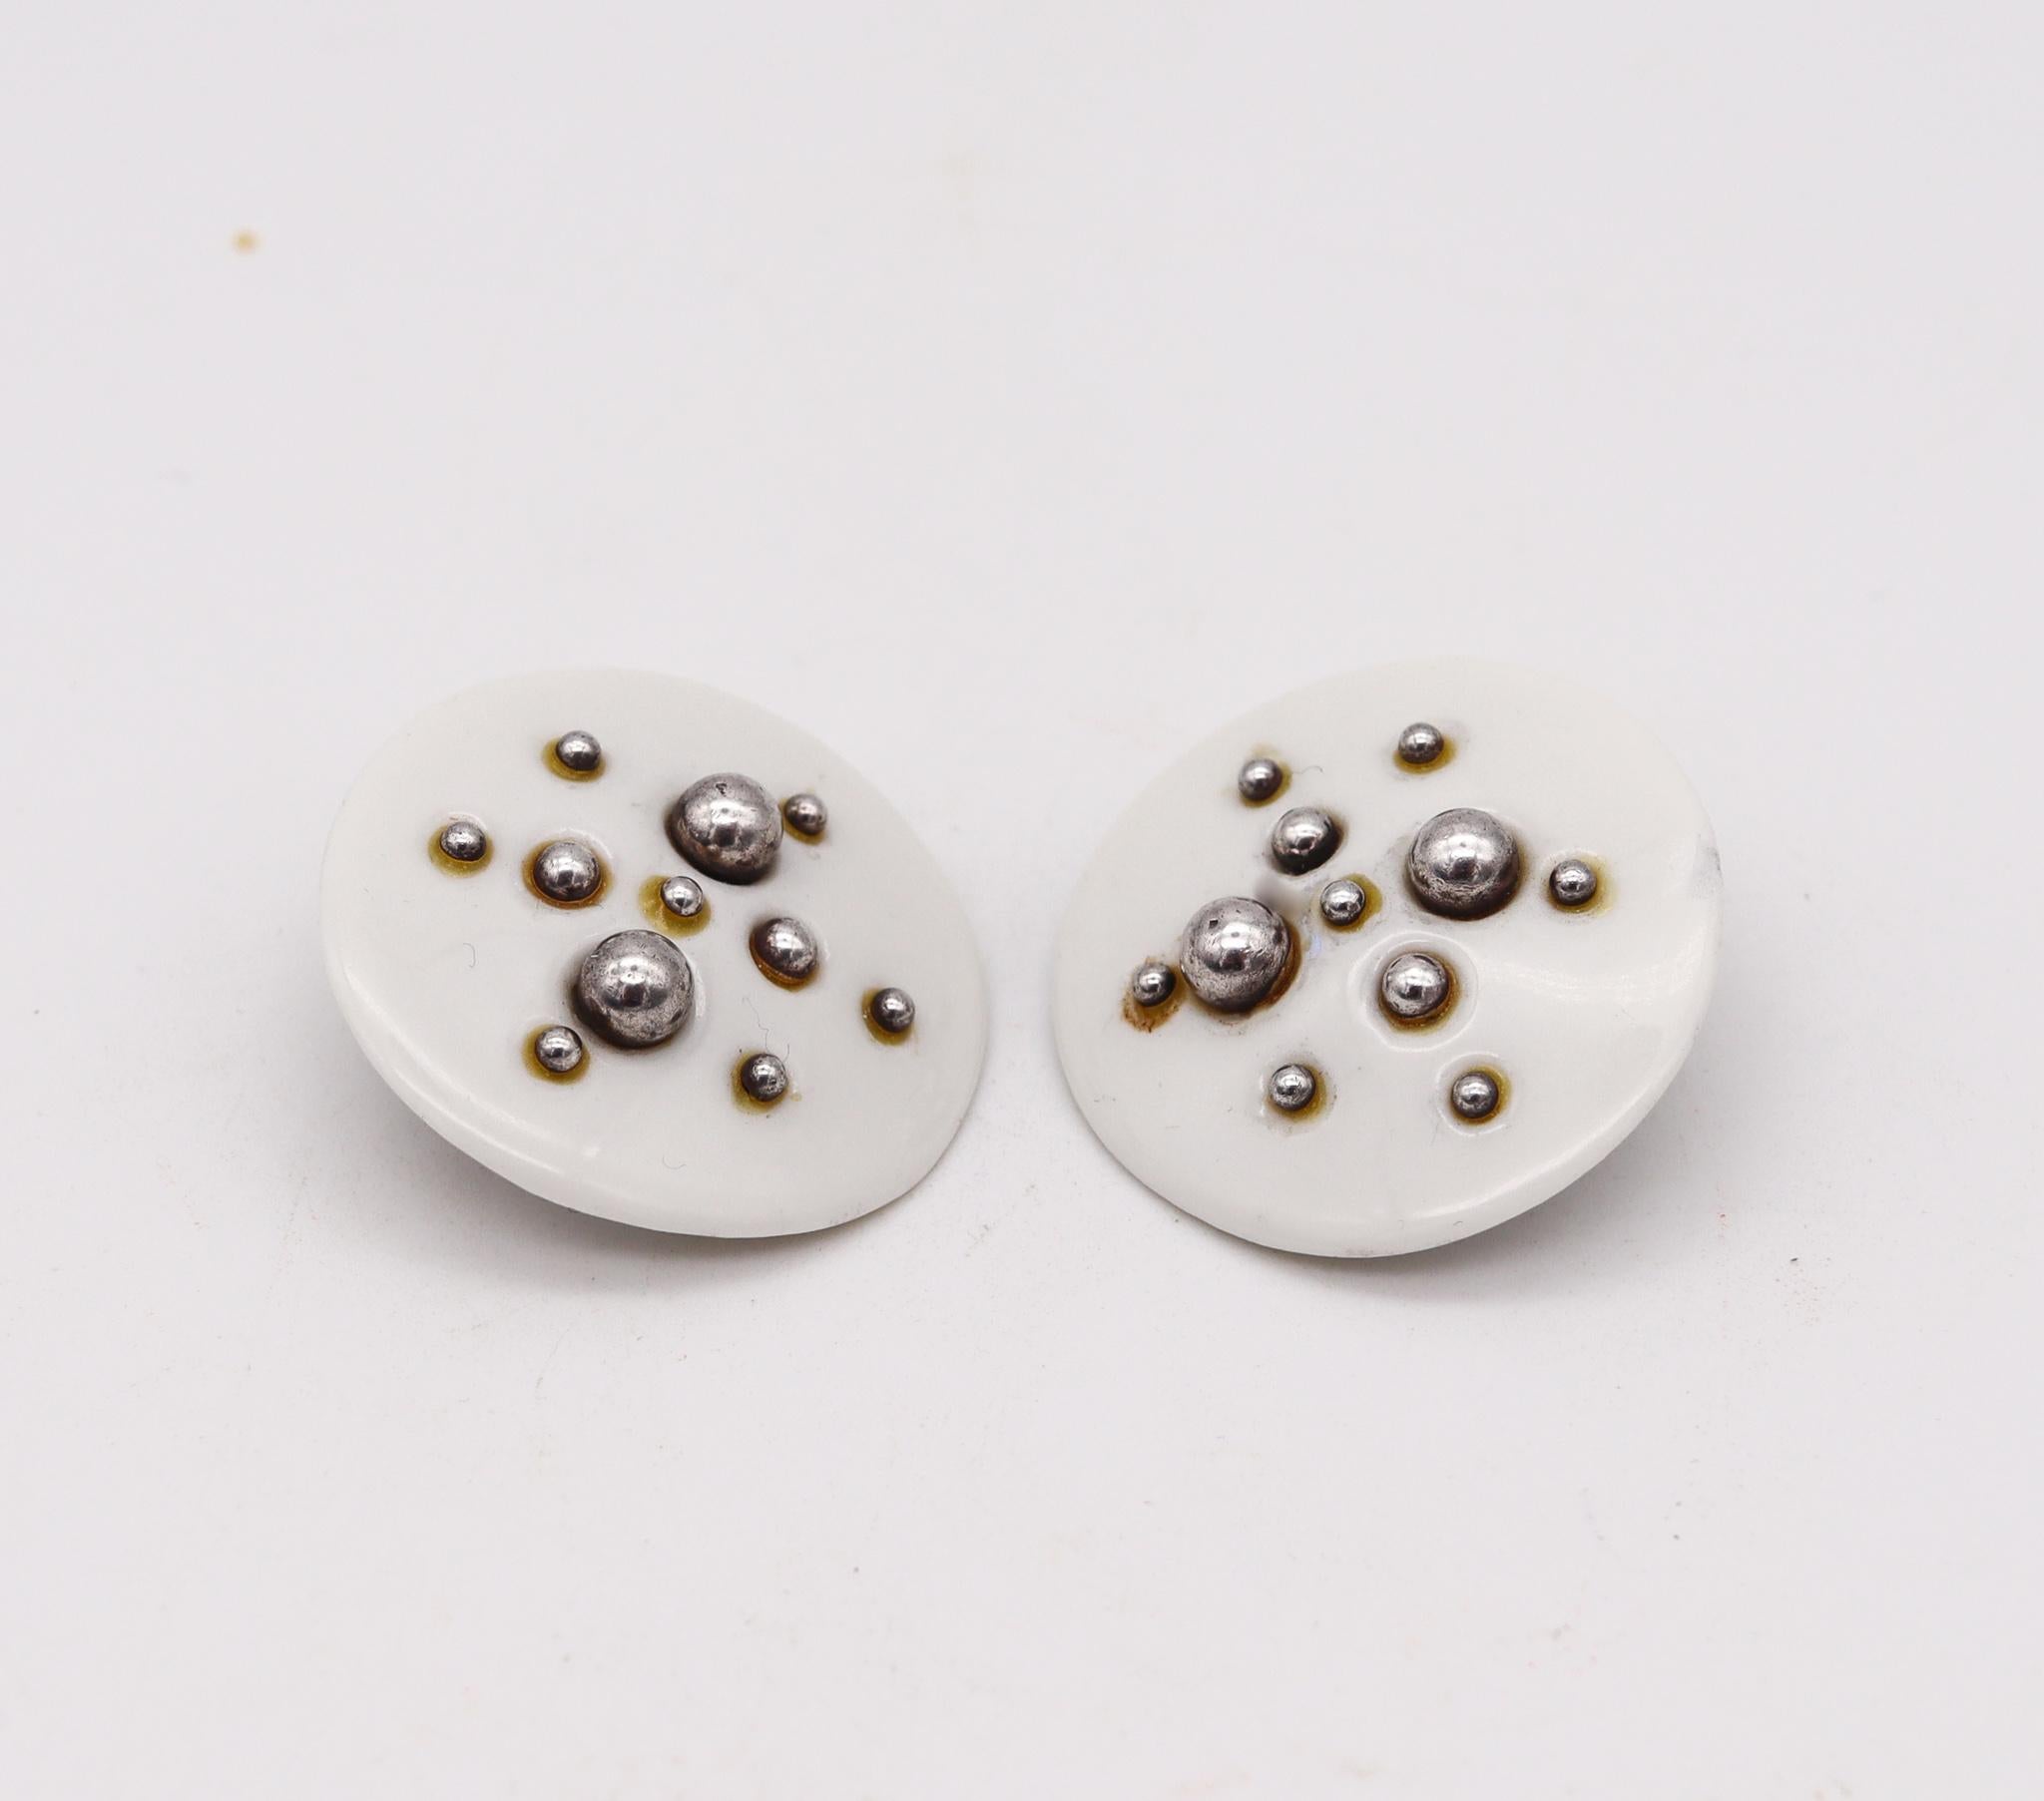 Spatialism earrings designed by Anton Michelsen for Royal Copenhagen.

A vintage modernist geometric earrings, created in Denmark by Anton Michelsen for the porcelain company of Royal Copenhagen, back in the 1960's. These pair of clips earrings has